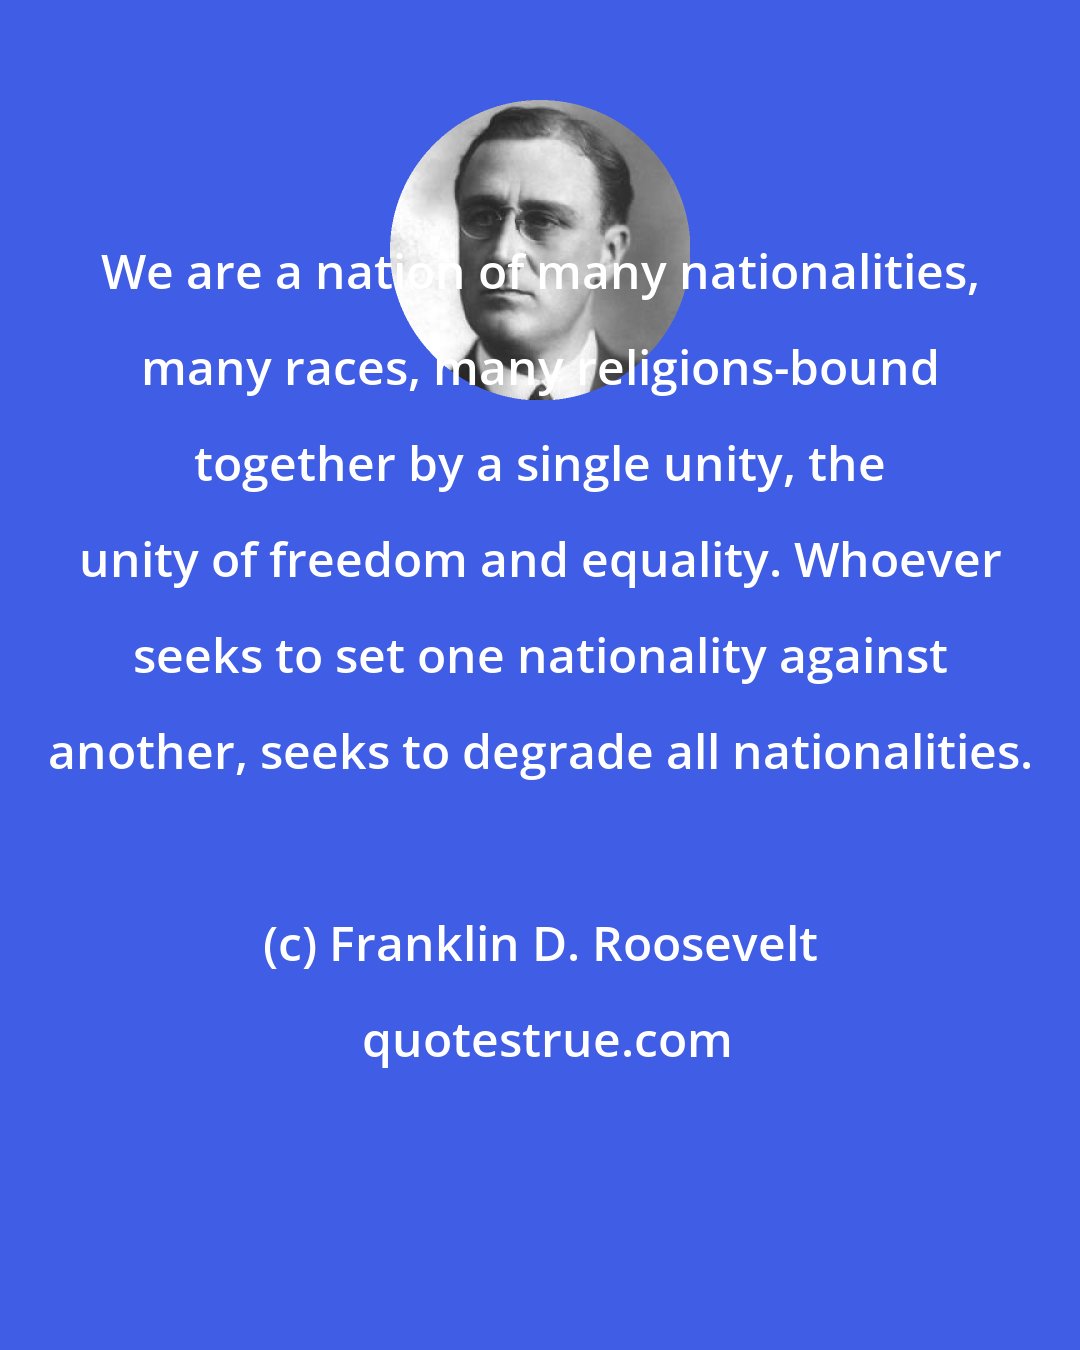 Franklin D. Roosevelt: We are a nation of many nationalities, many races, many religions-bound together by a single unity, the unity of freedom and equality. Whoever seeks to set one nationality against another, seeks to degrade all nationalities.